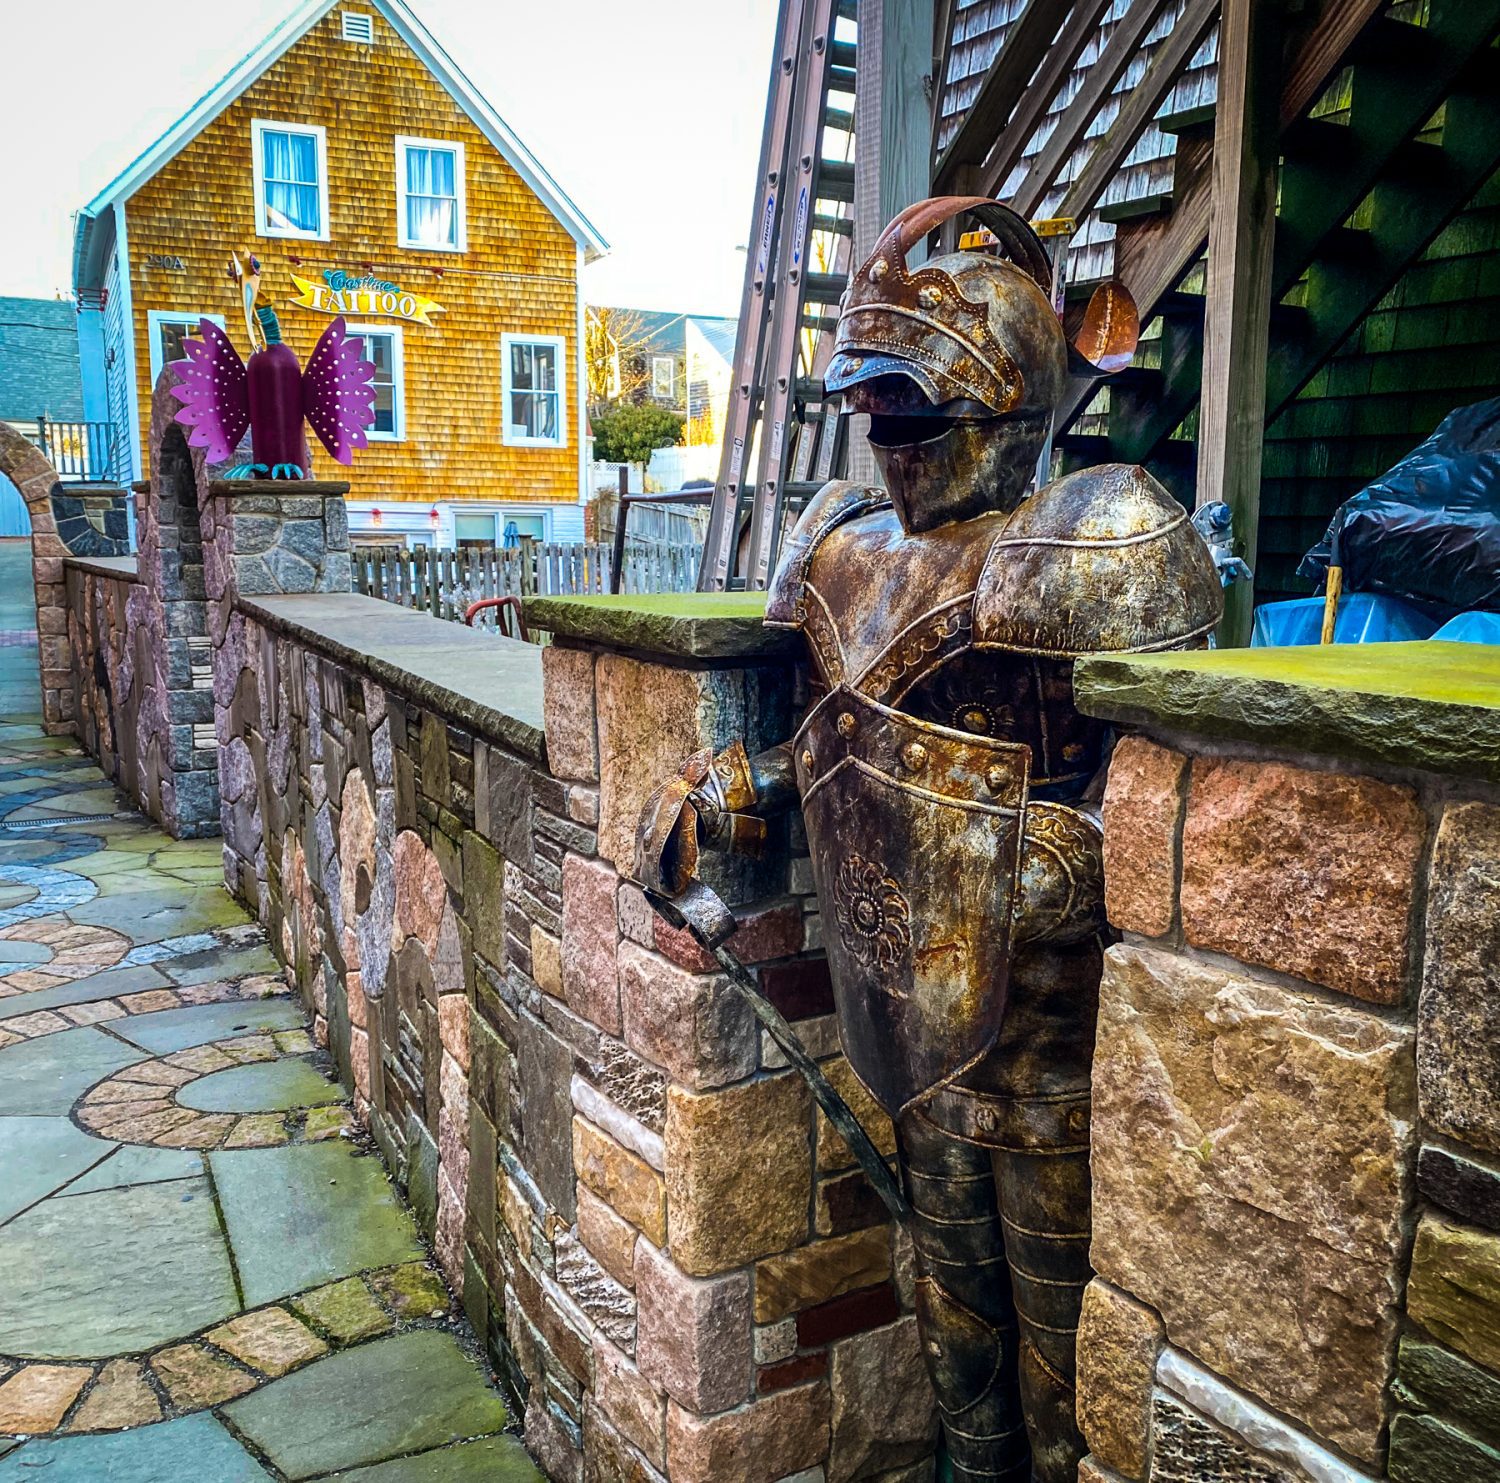 A suit of armor in the Provincetown art alley.